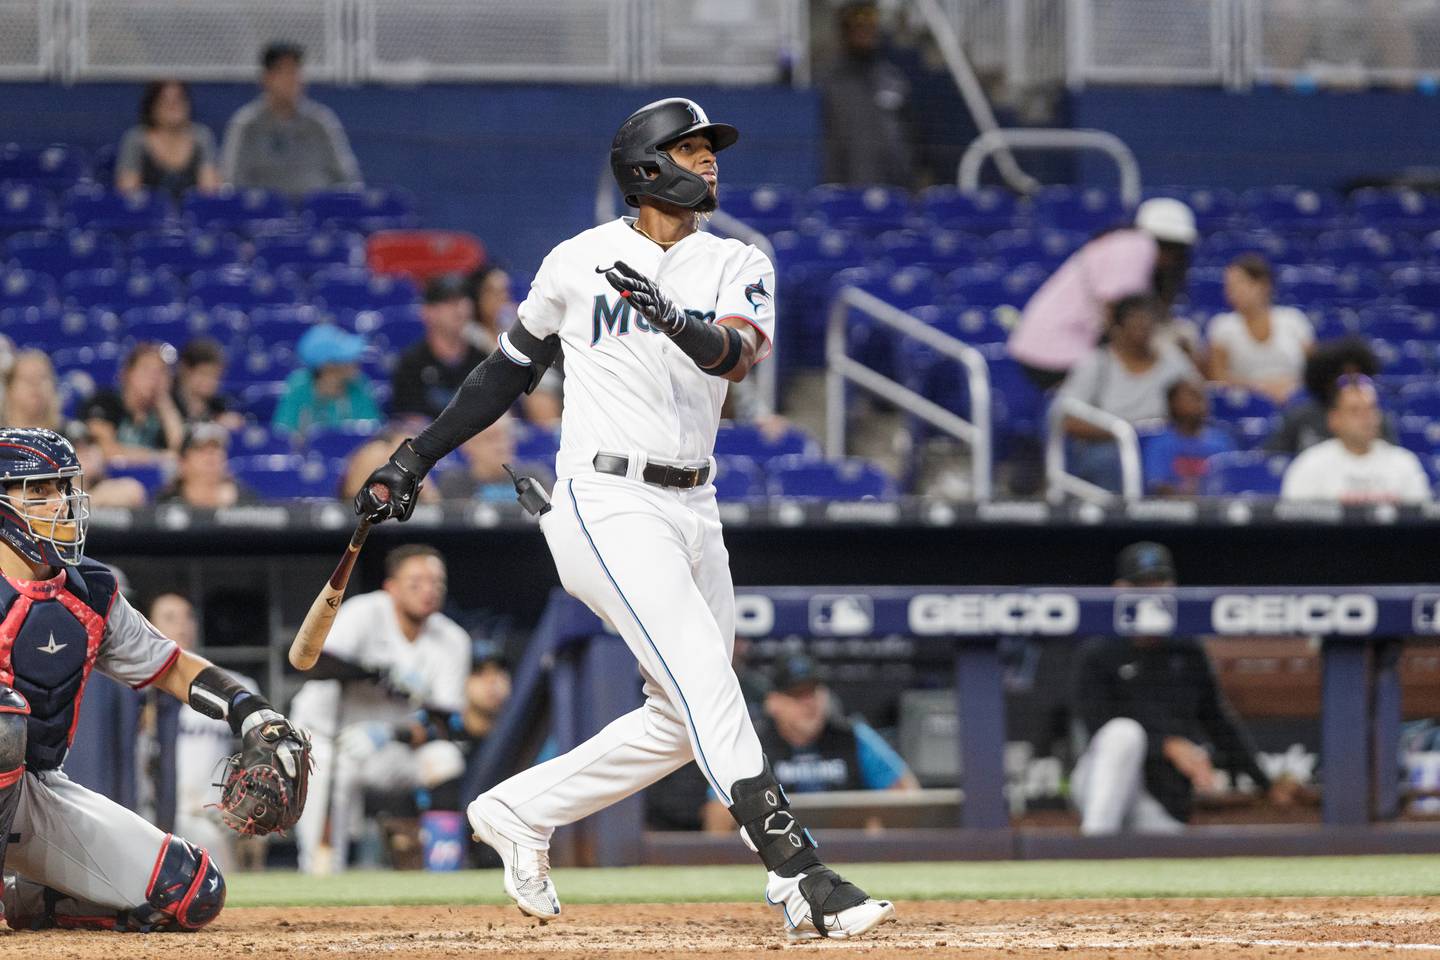 Lewin Díaz of the Miami Marlins hits a home run during the eighth inning against the Washington Nationals at loanDepot park on September 25, 2022 in Miami, Florida.